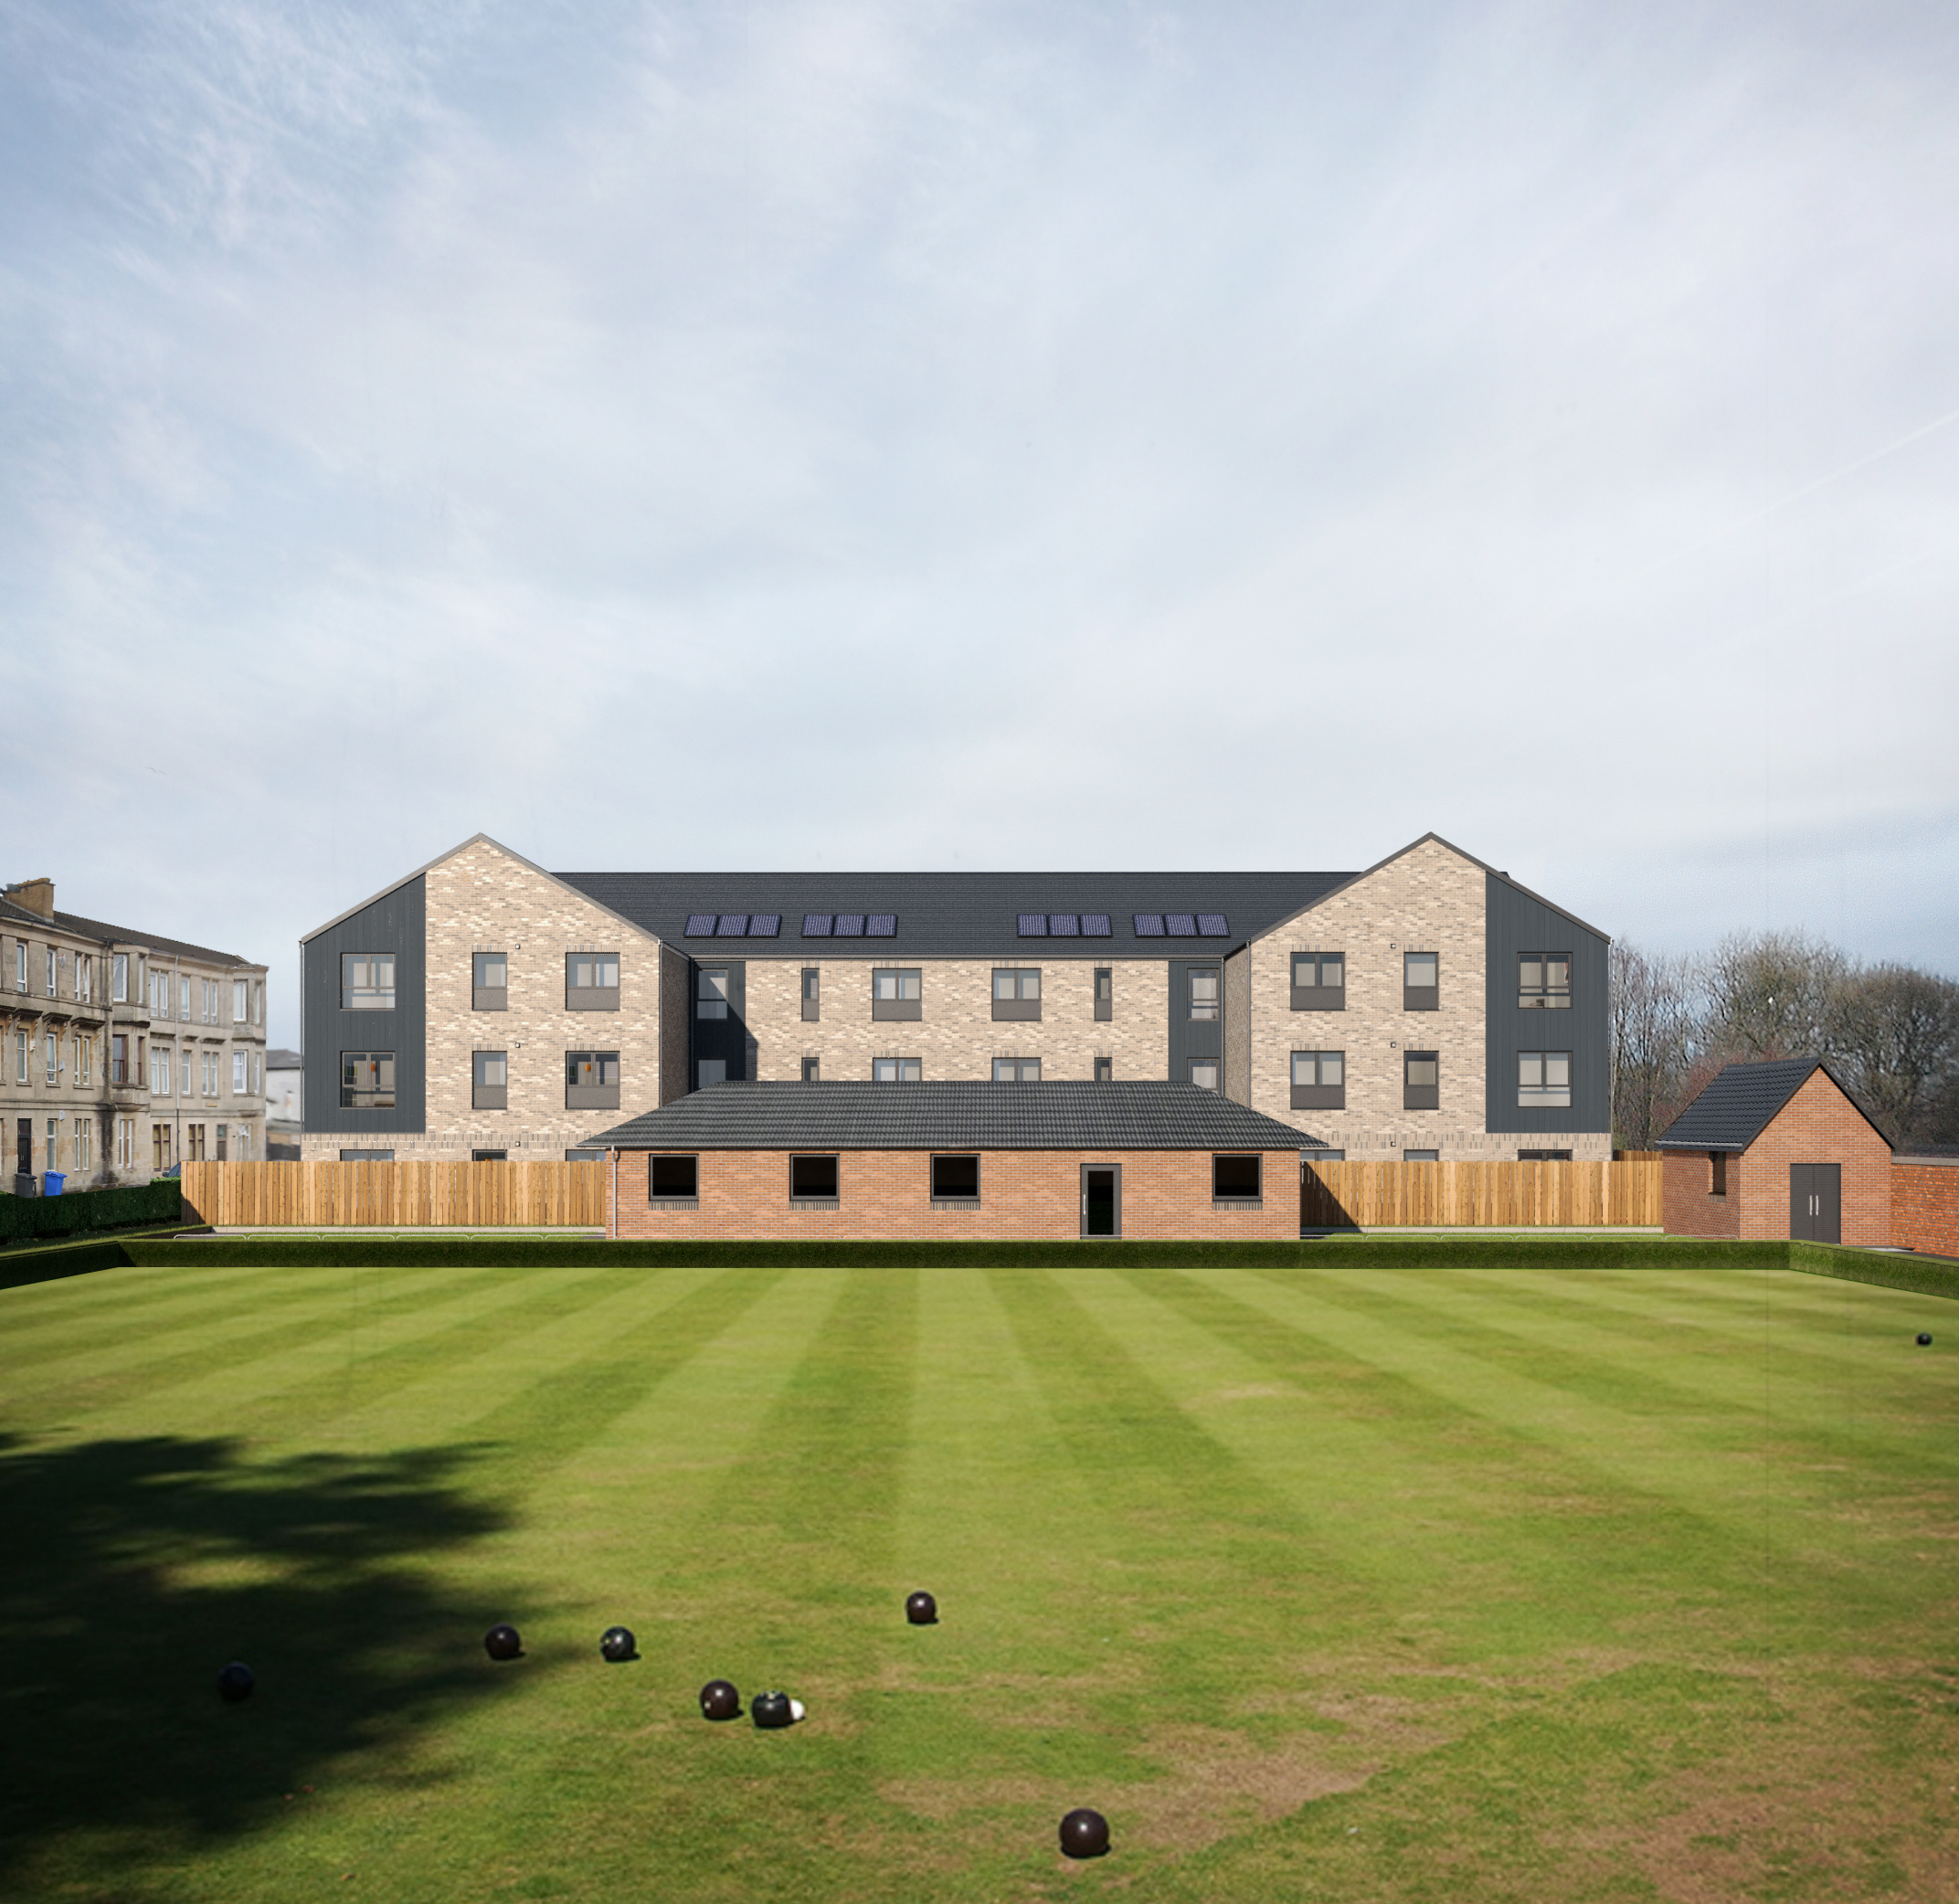 A view of how the flats would look from the remaining bowling green